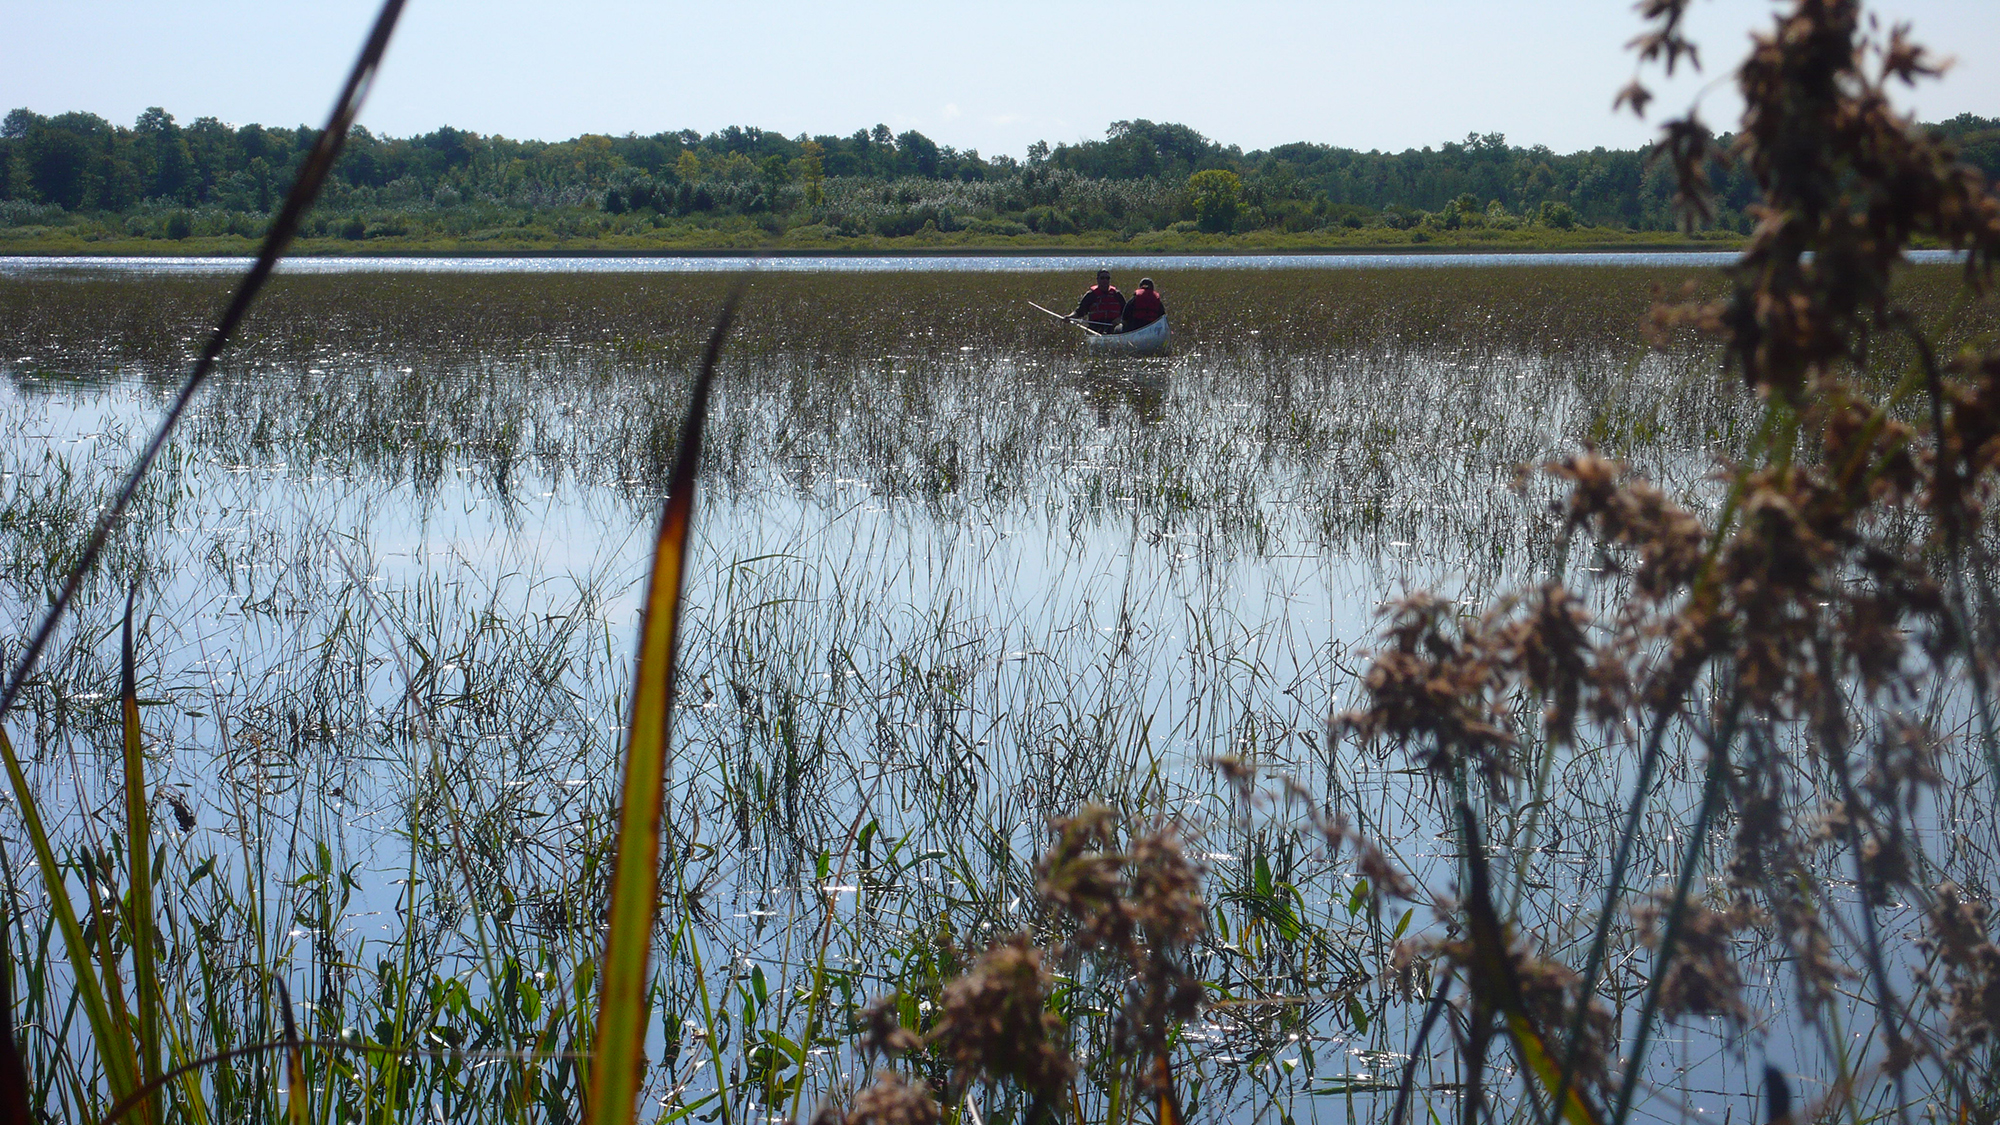 Lake, lakeshore, trees, wild rice, manoomin, canoe with two people